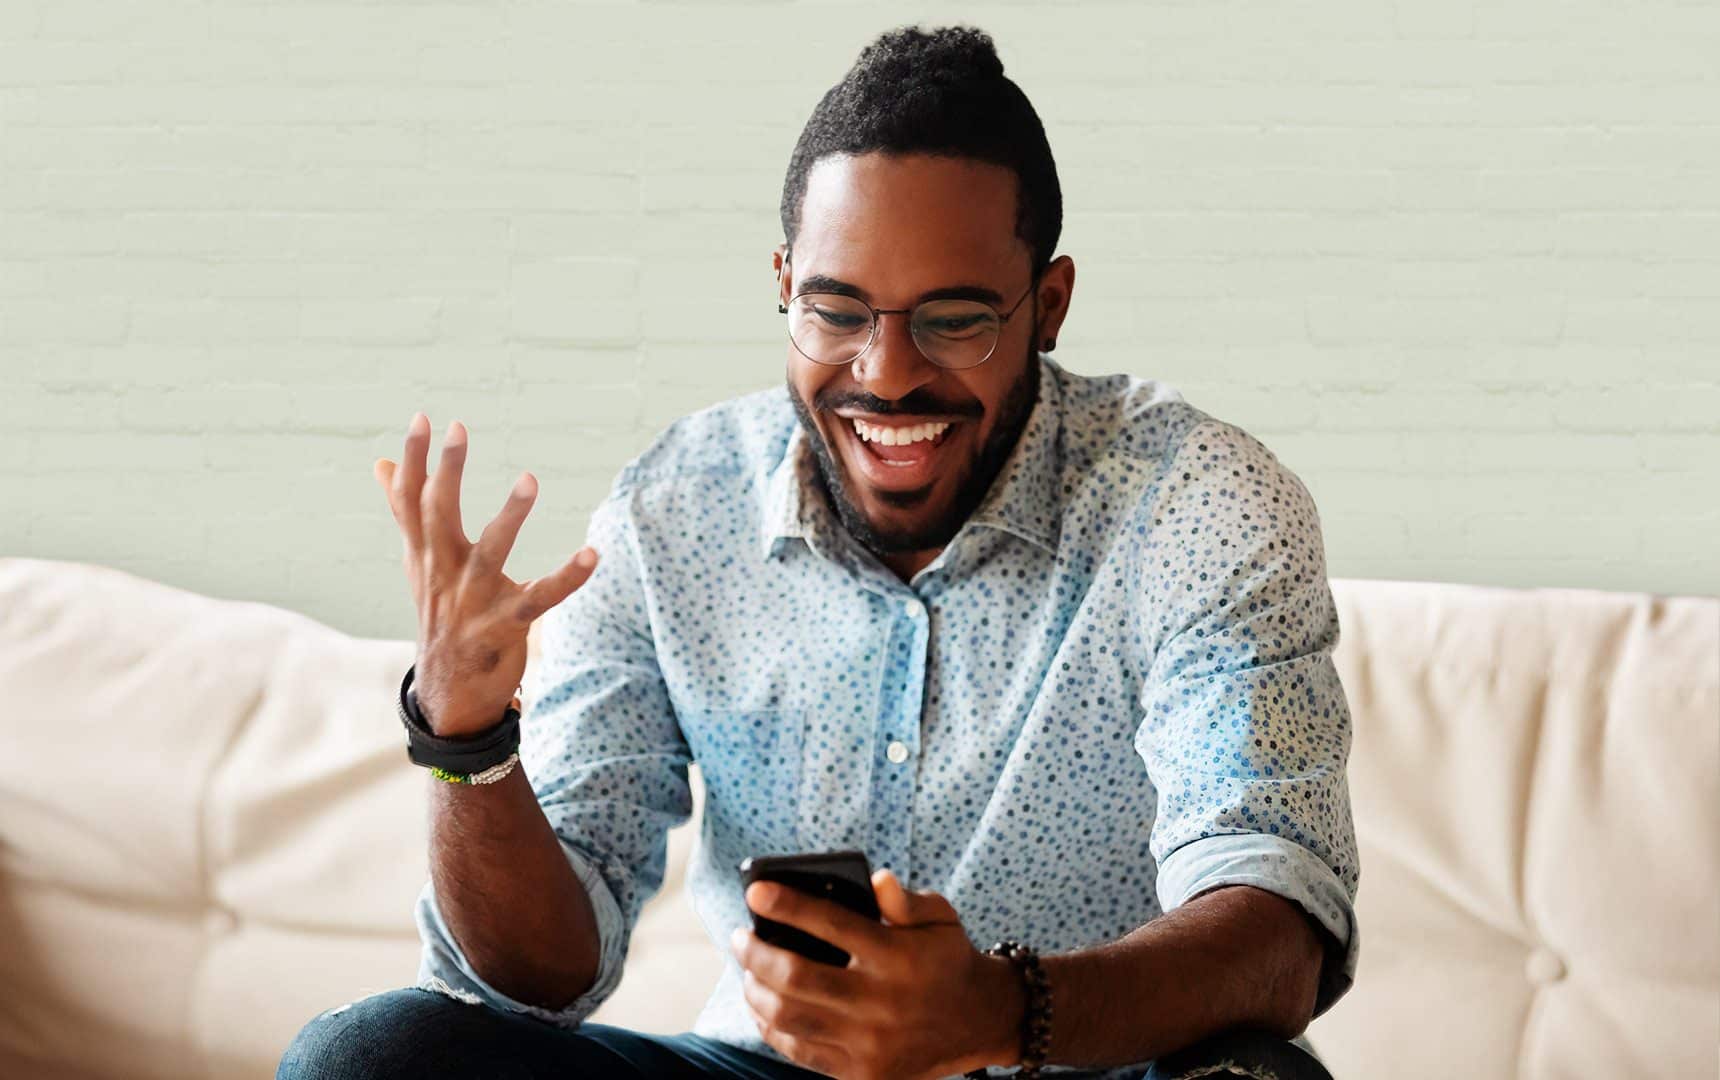 Man grinning at his smartphone